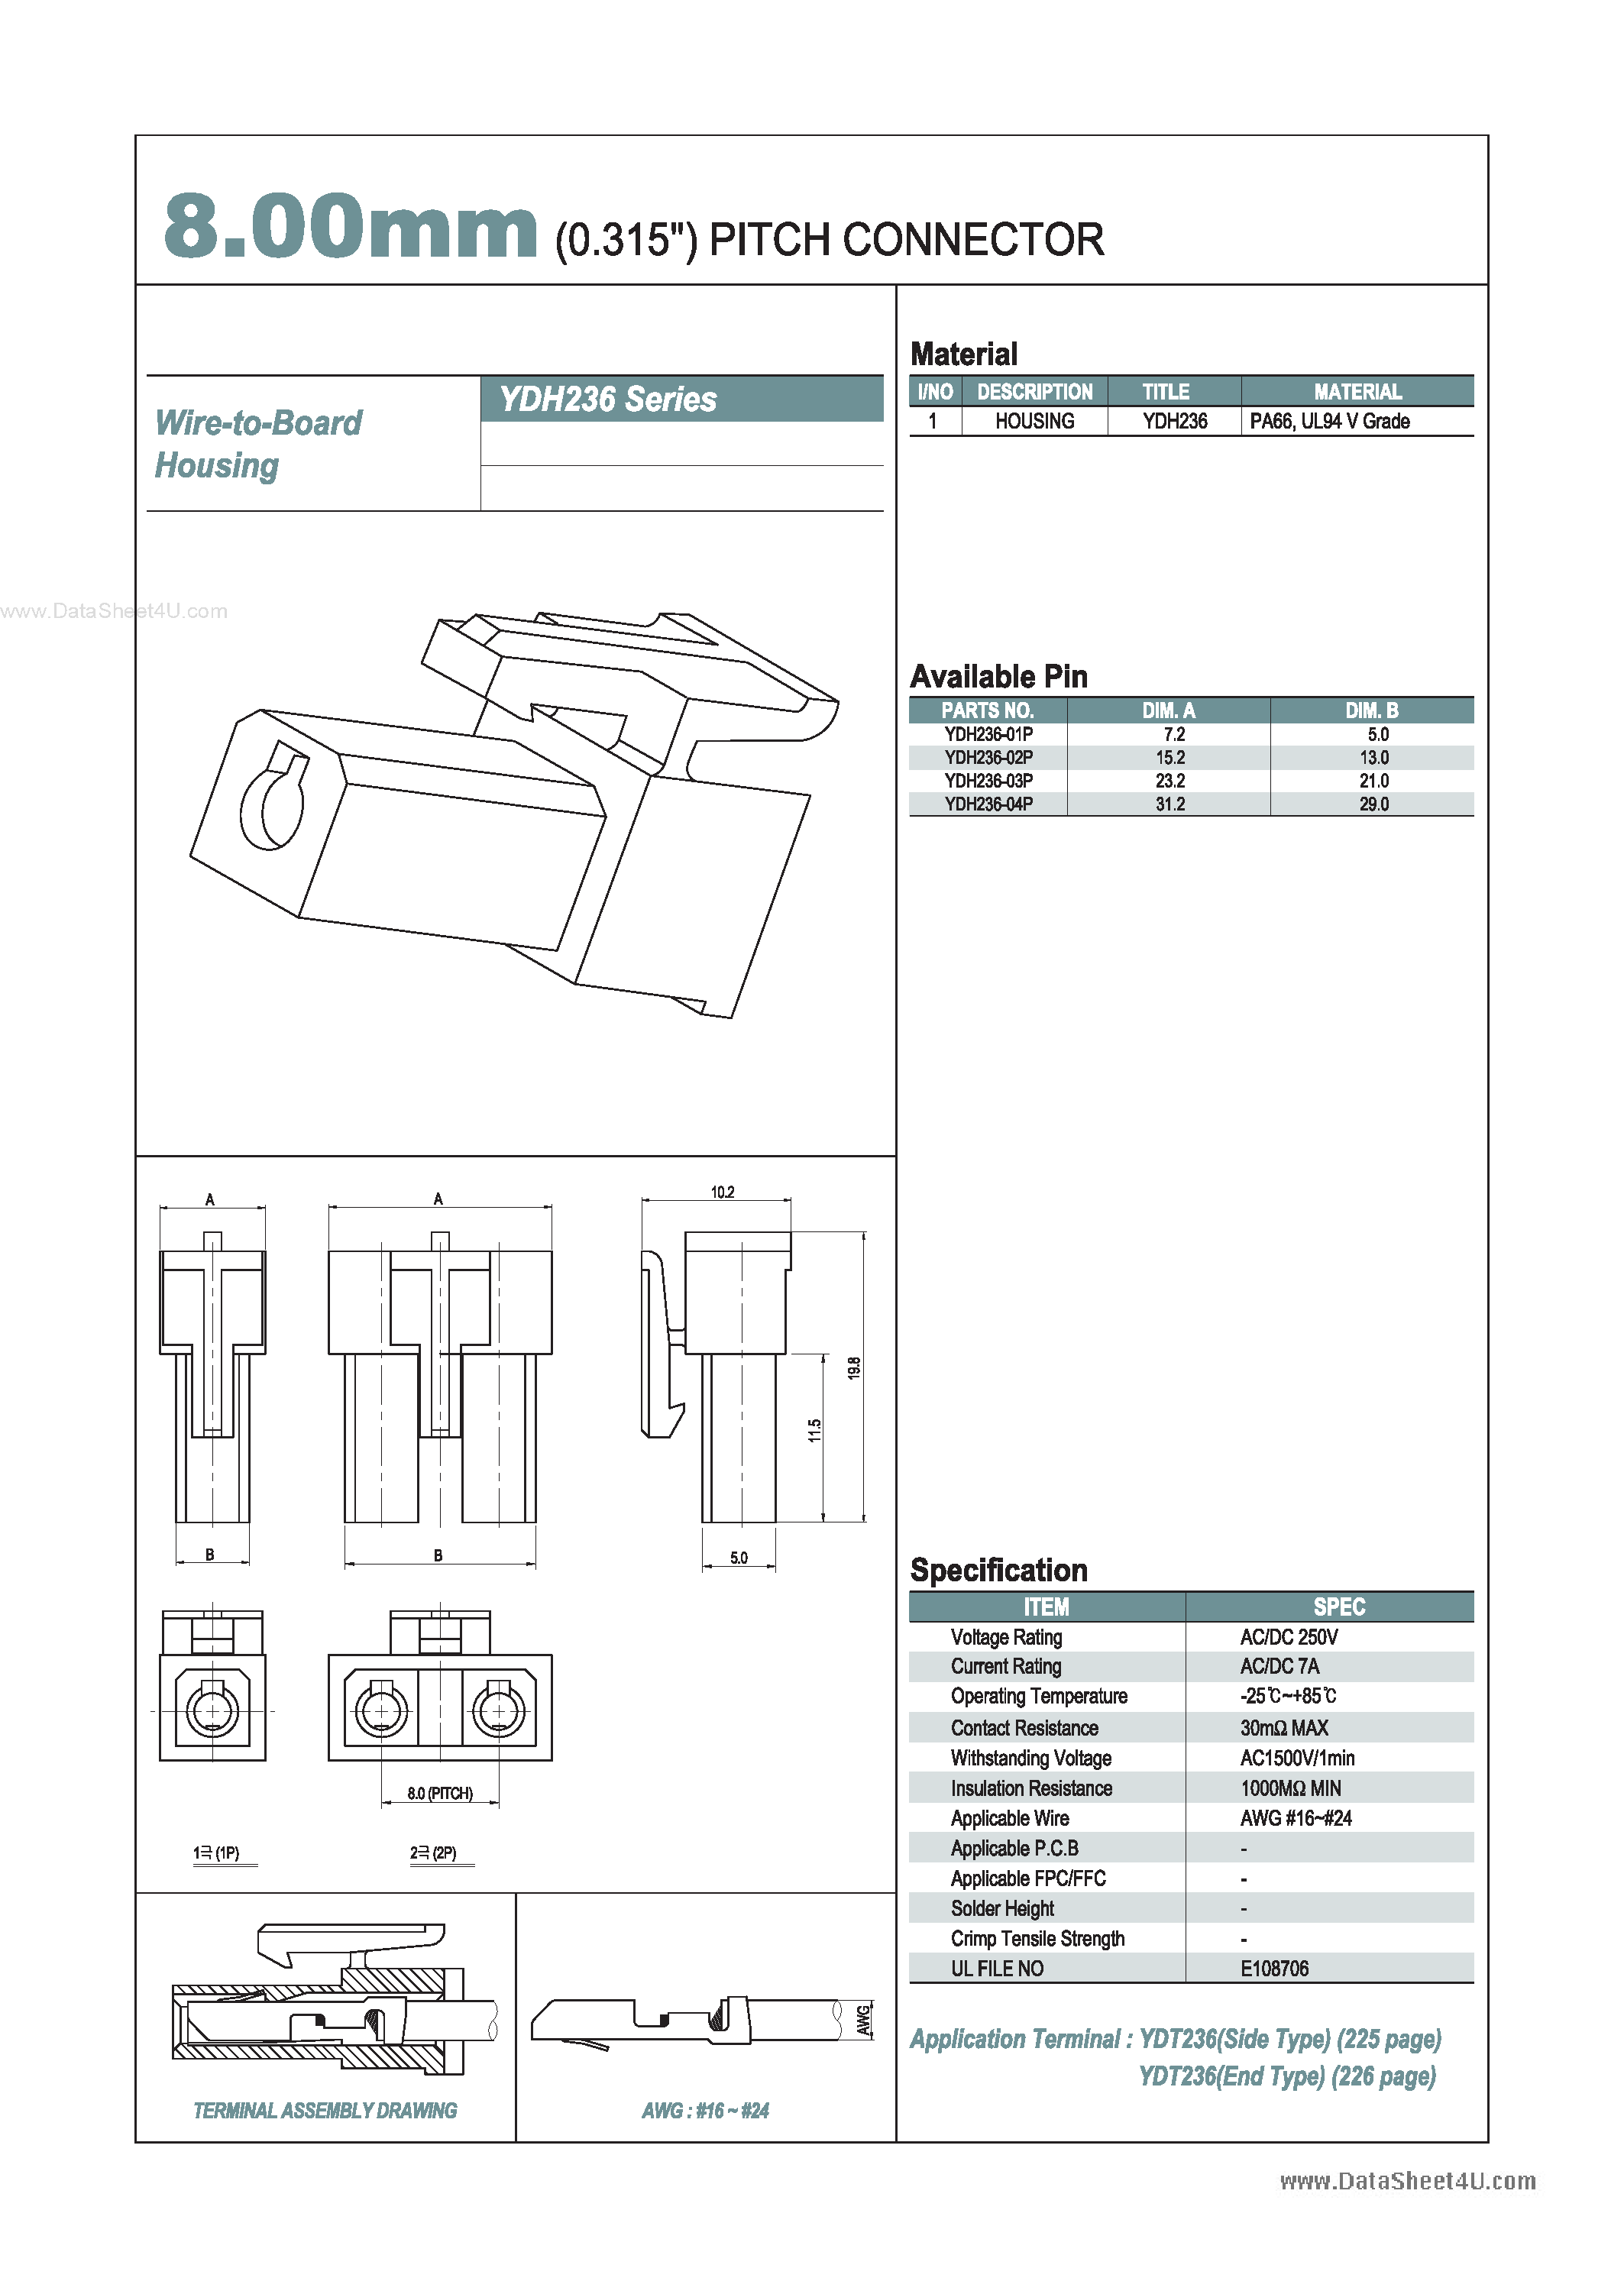 Datasheet YDH236 - 8.00mm PITCH CONNECTOR page 1